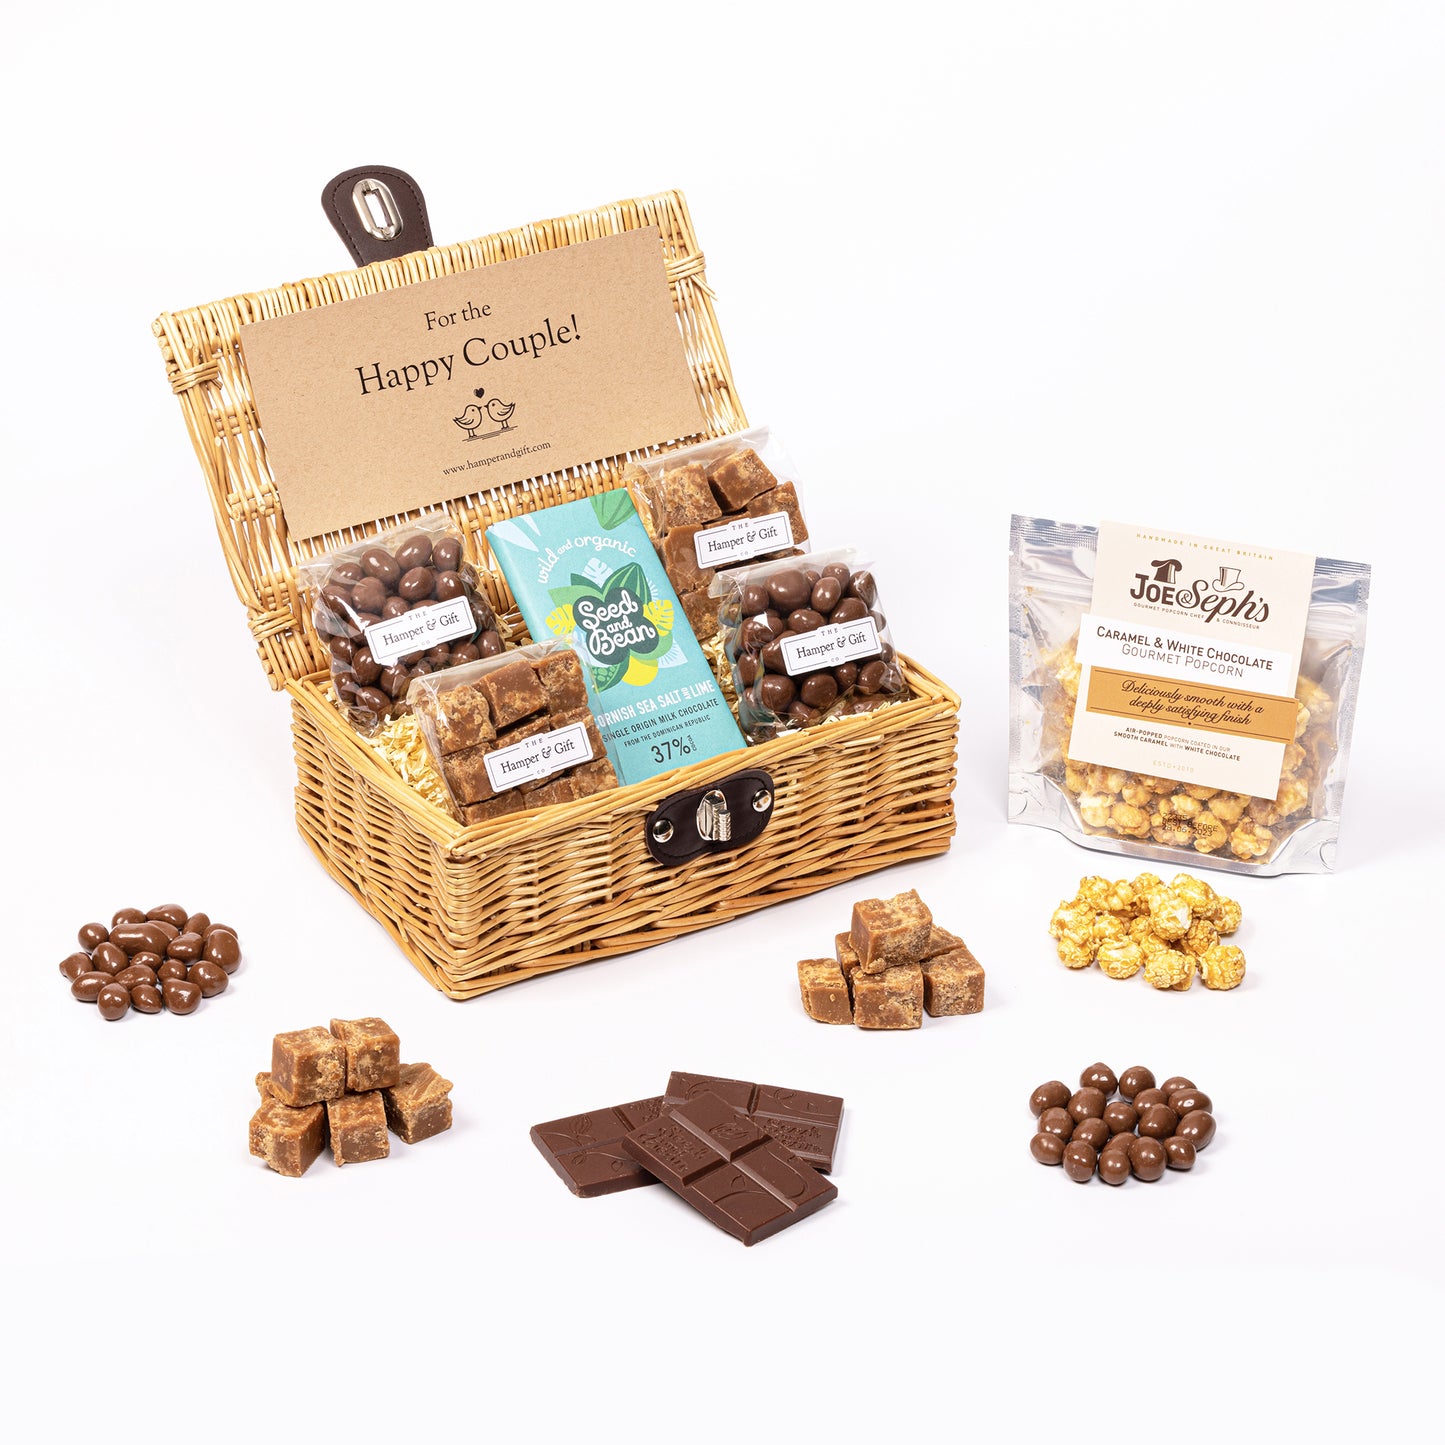 Little Happy Couple Hamper filled with chocolate, fudge and gourmet popcorn